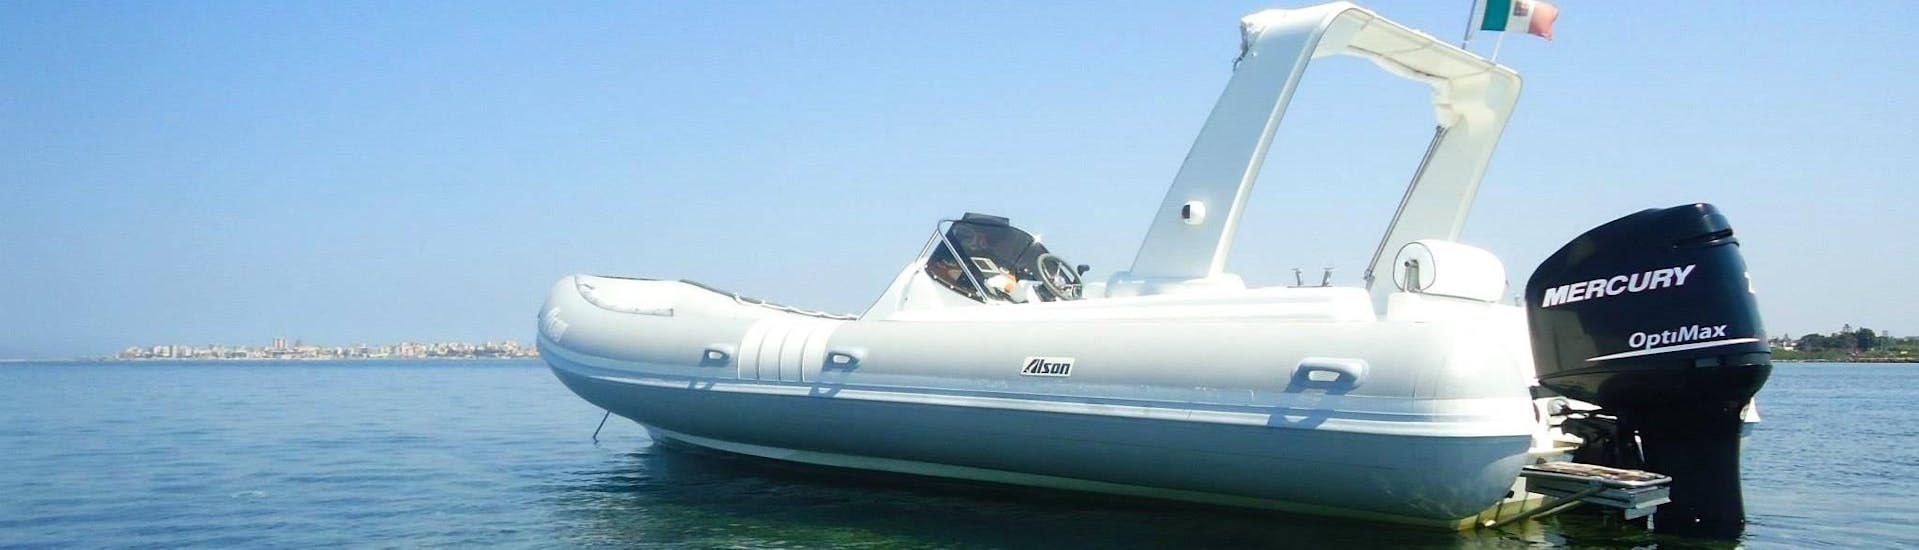 Picture of the RIB boat from Navigare le Egadi Favignana used during the RIB boat trips.